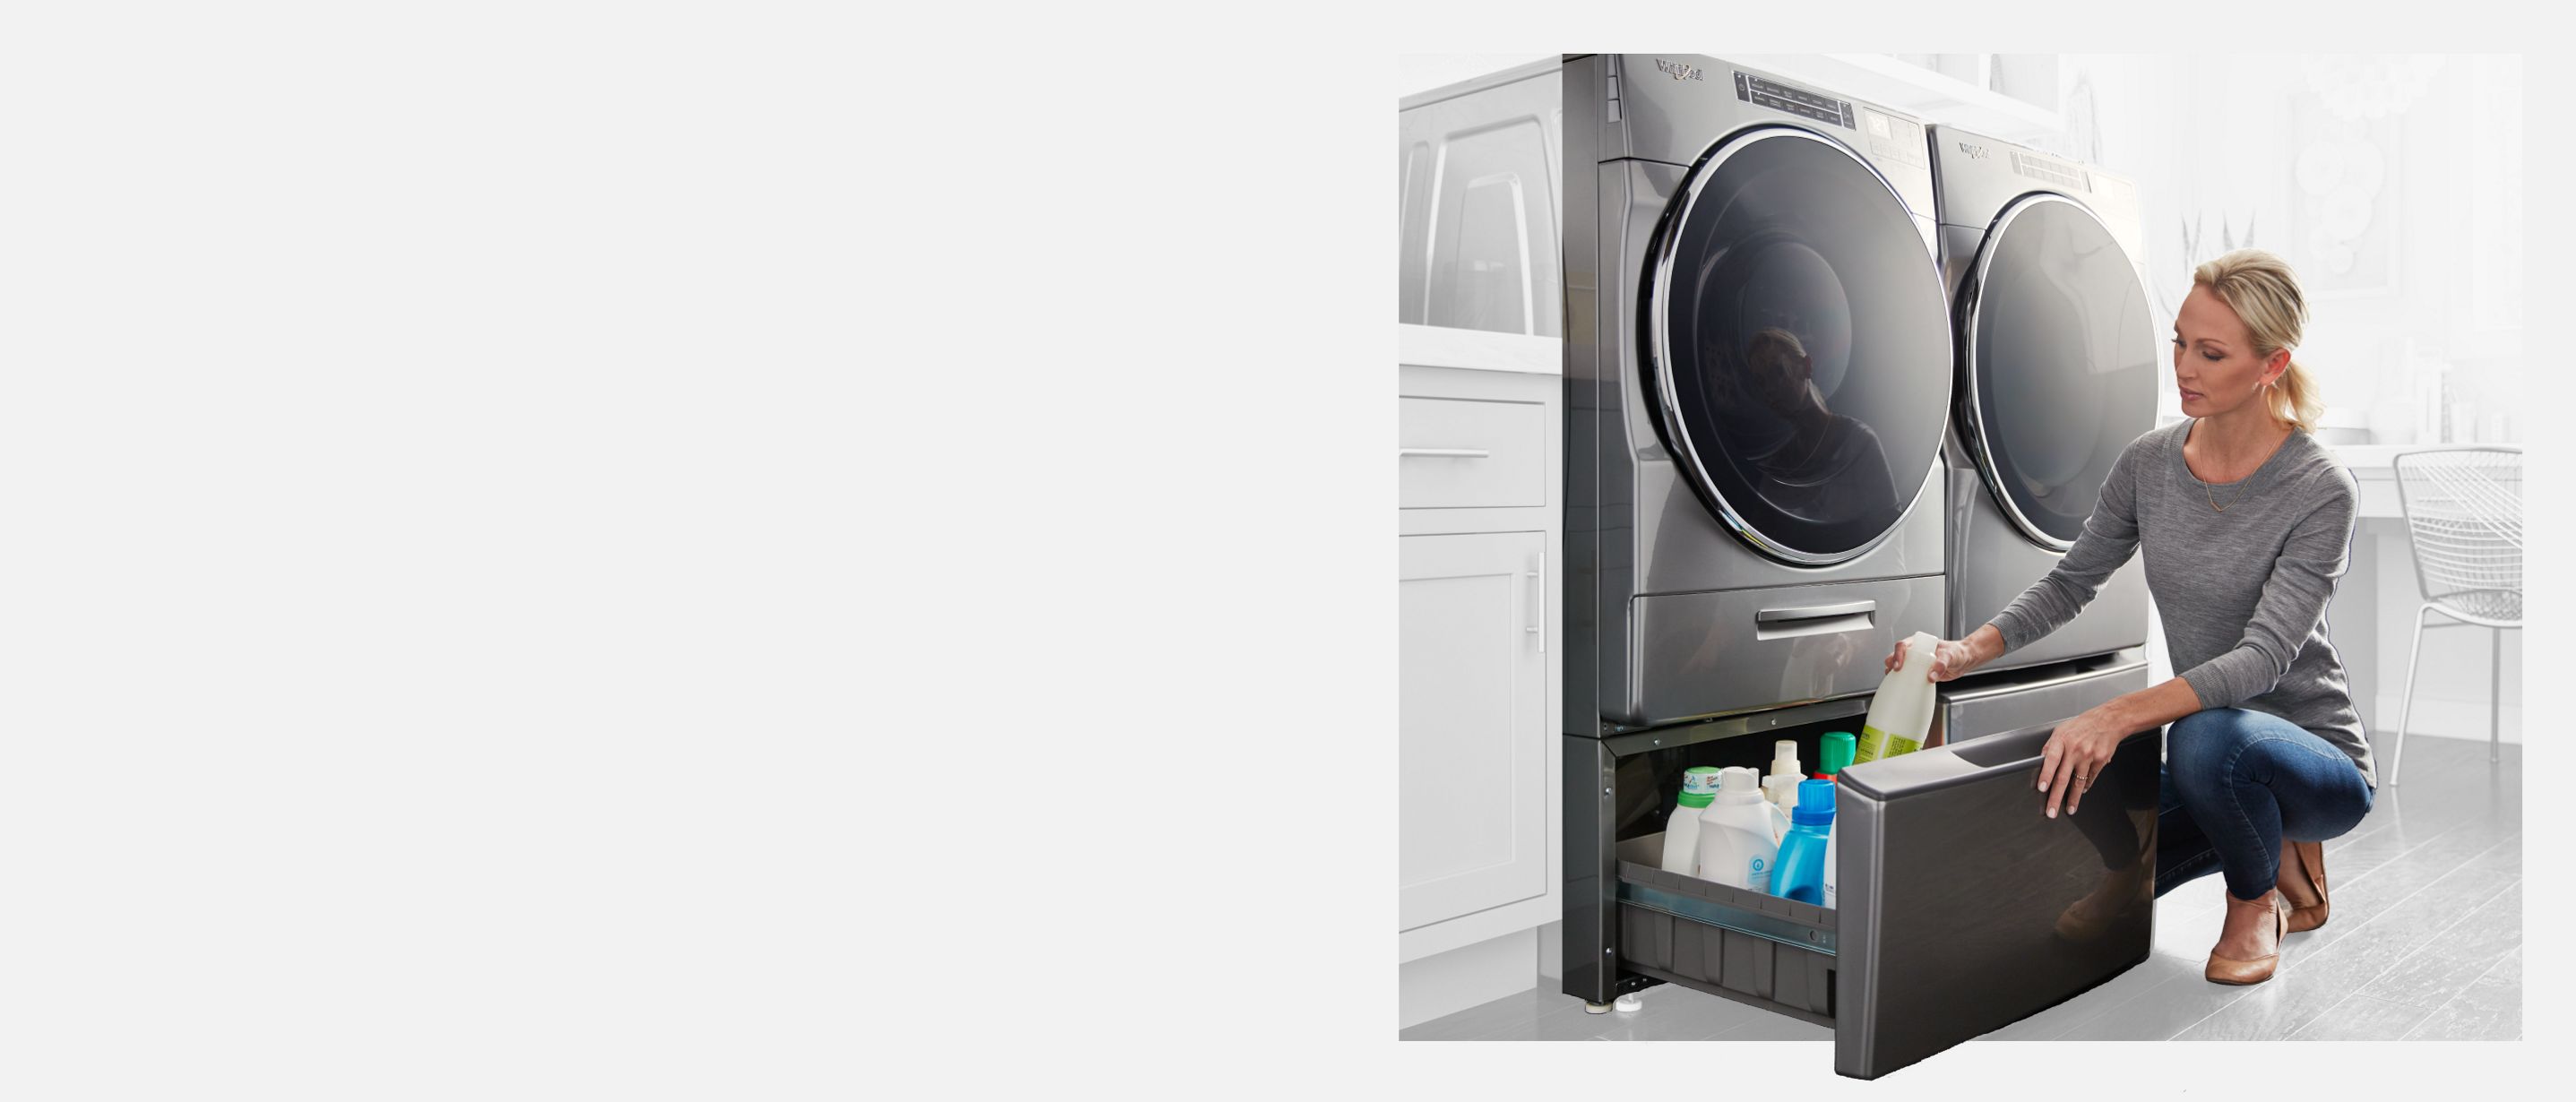 Shop limited-time offers on select Whirlpool® appliances.